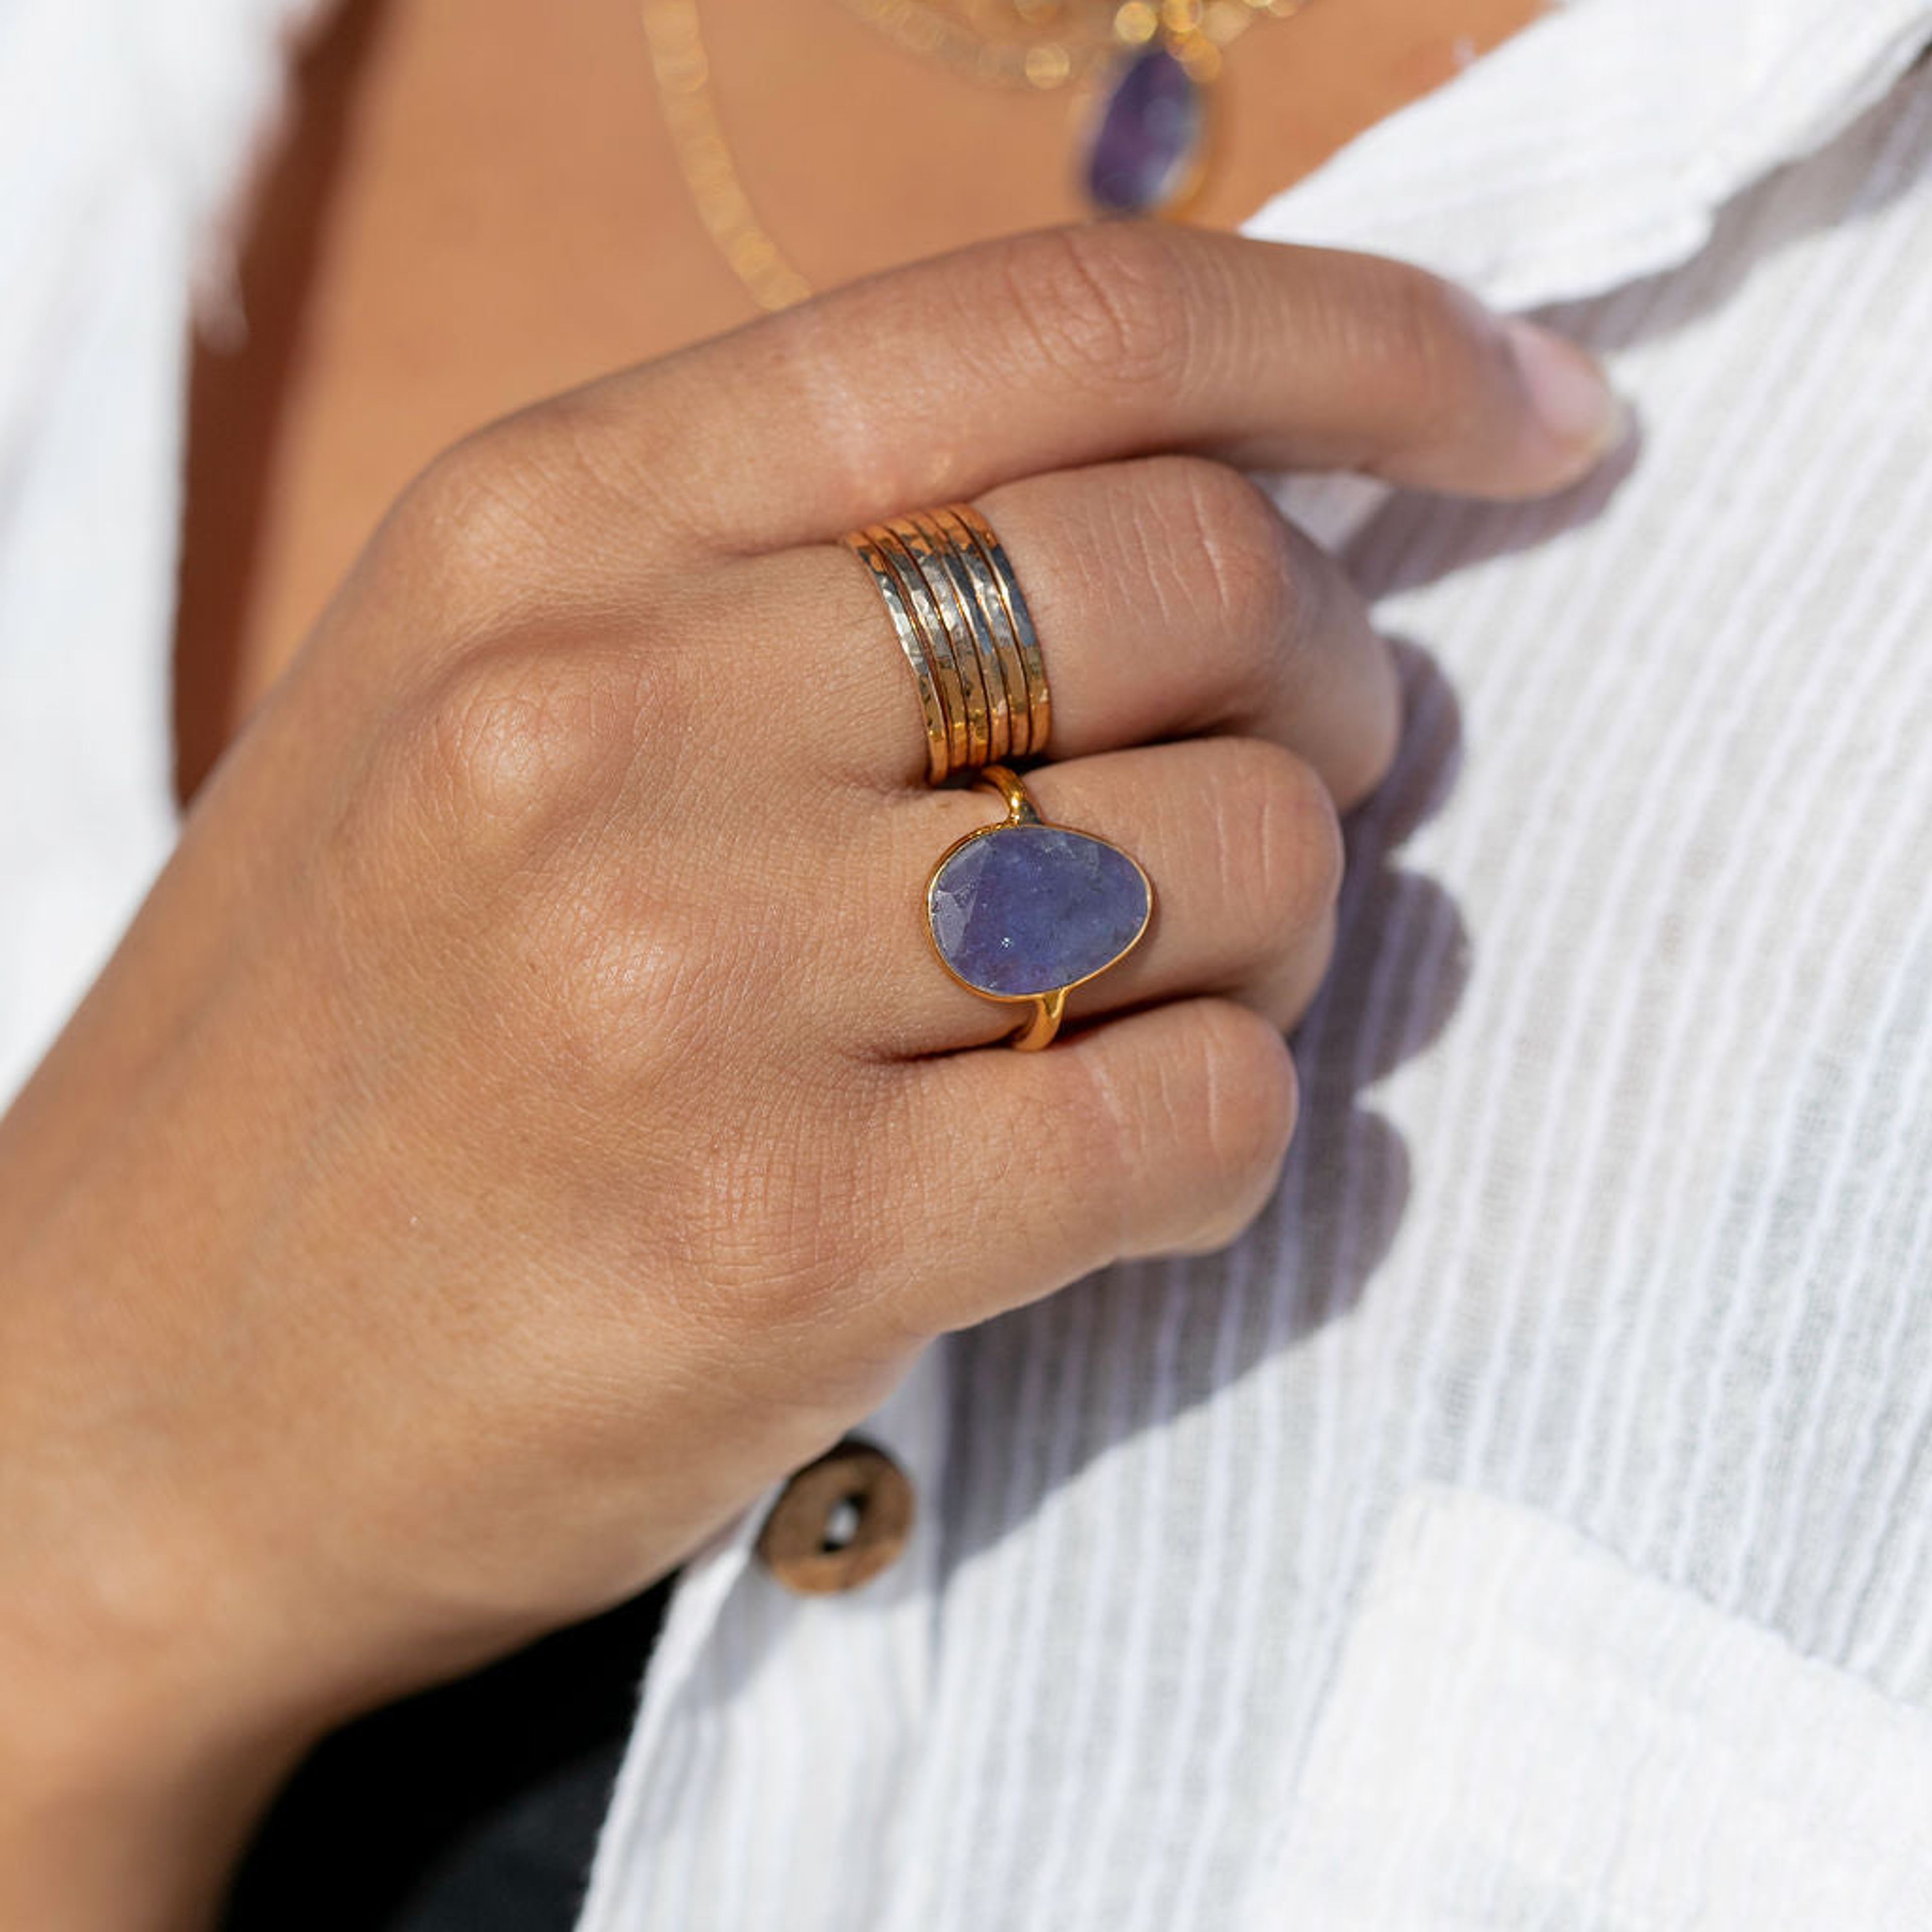 Hammered Gold Filled Stack Ring - Kaiko